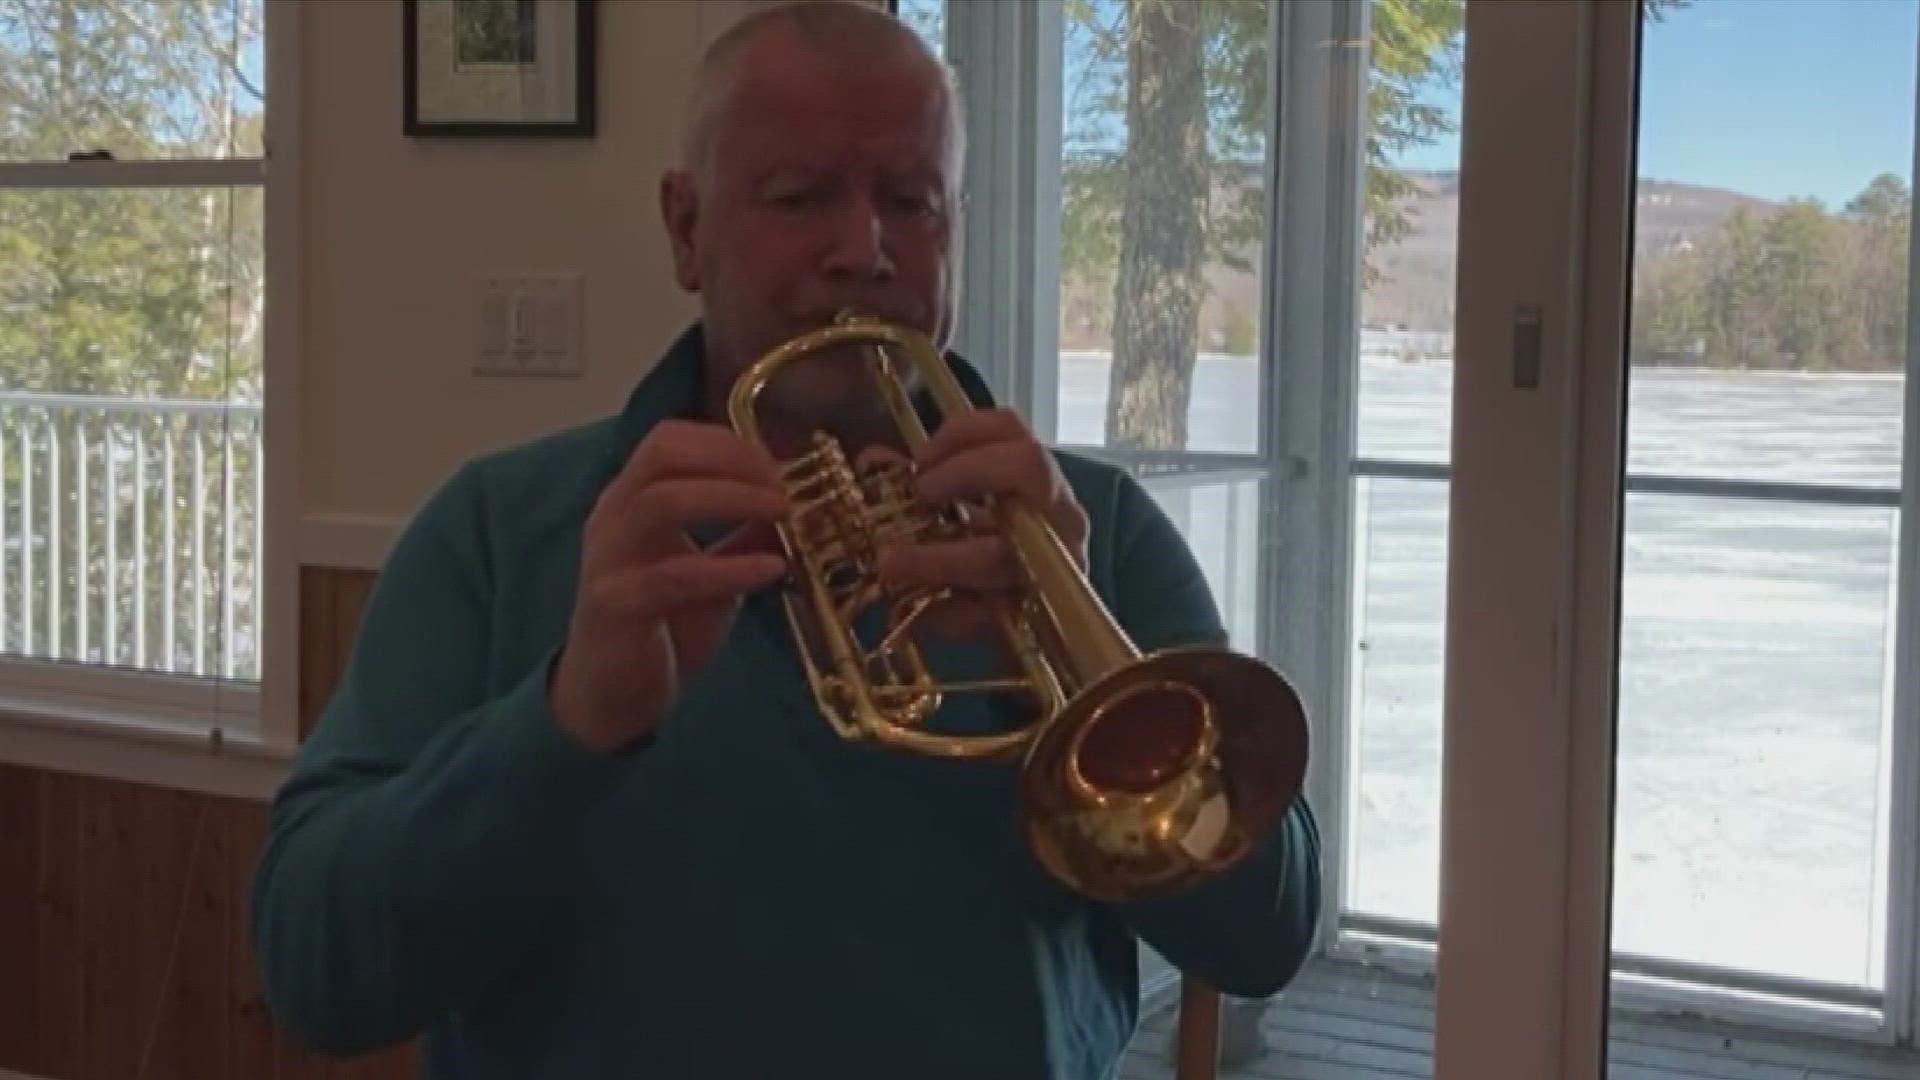 Professor of Trumpet Jack Burt has kept his practice going to stay focused during the pandemic